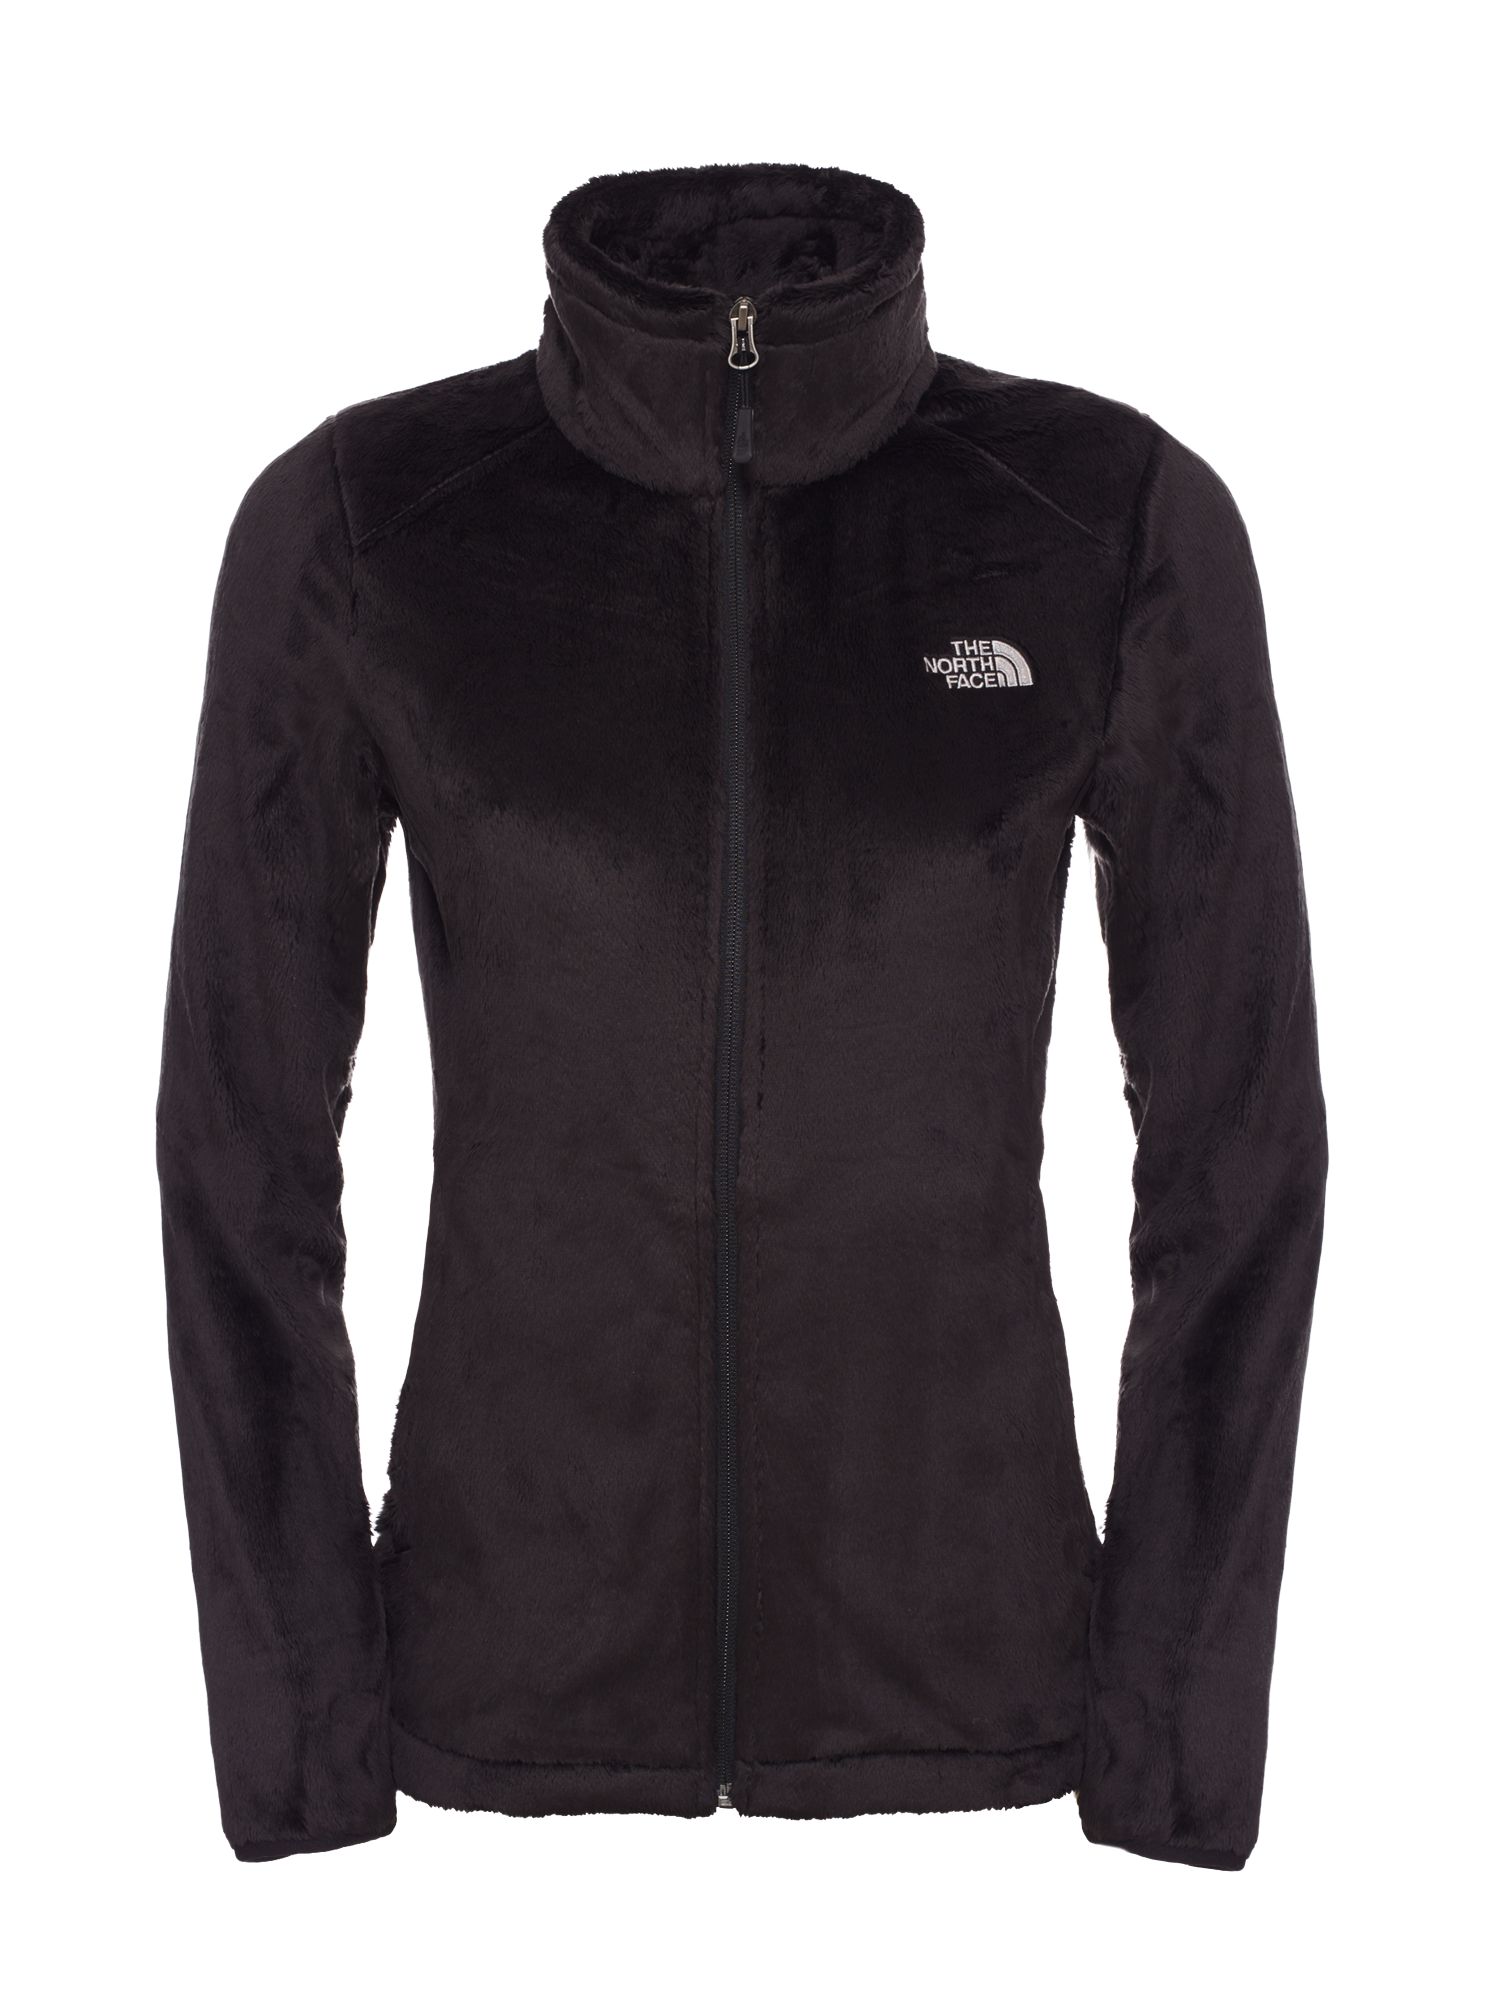 The North Face Osito 2 Women's Fleece Jacket at John Lewis & Partners